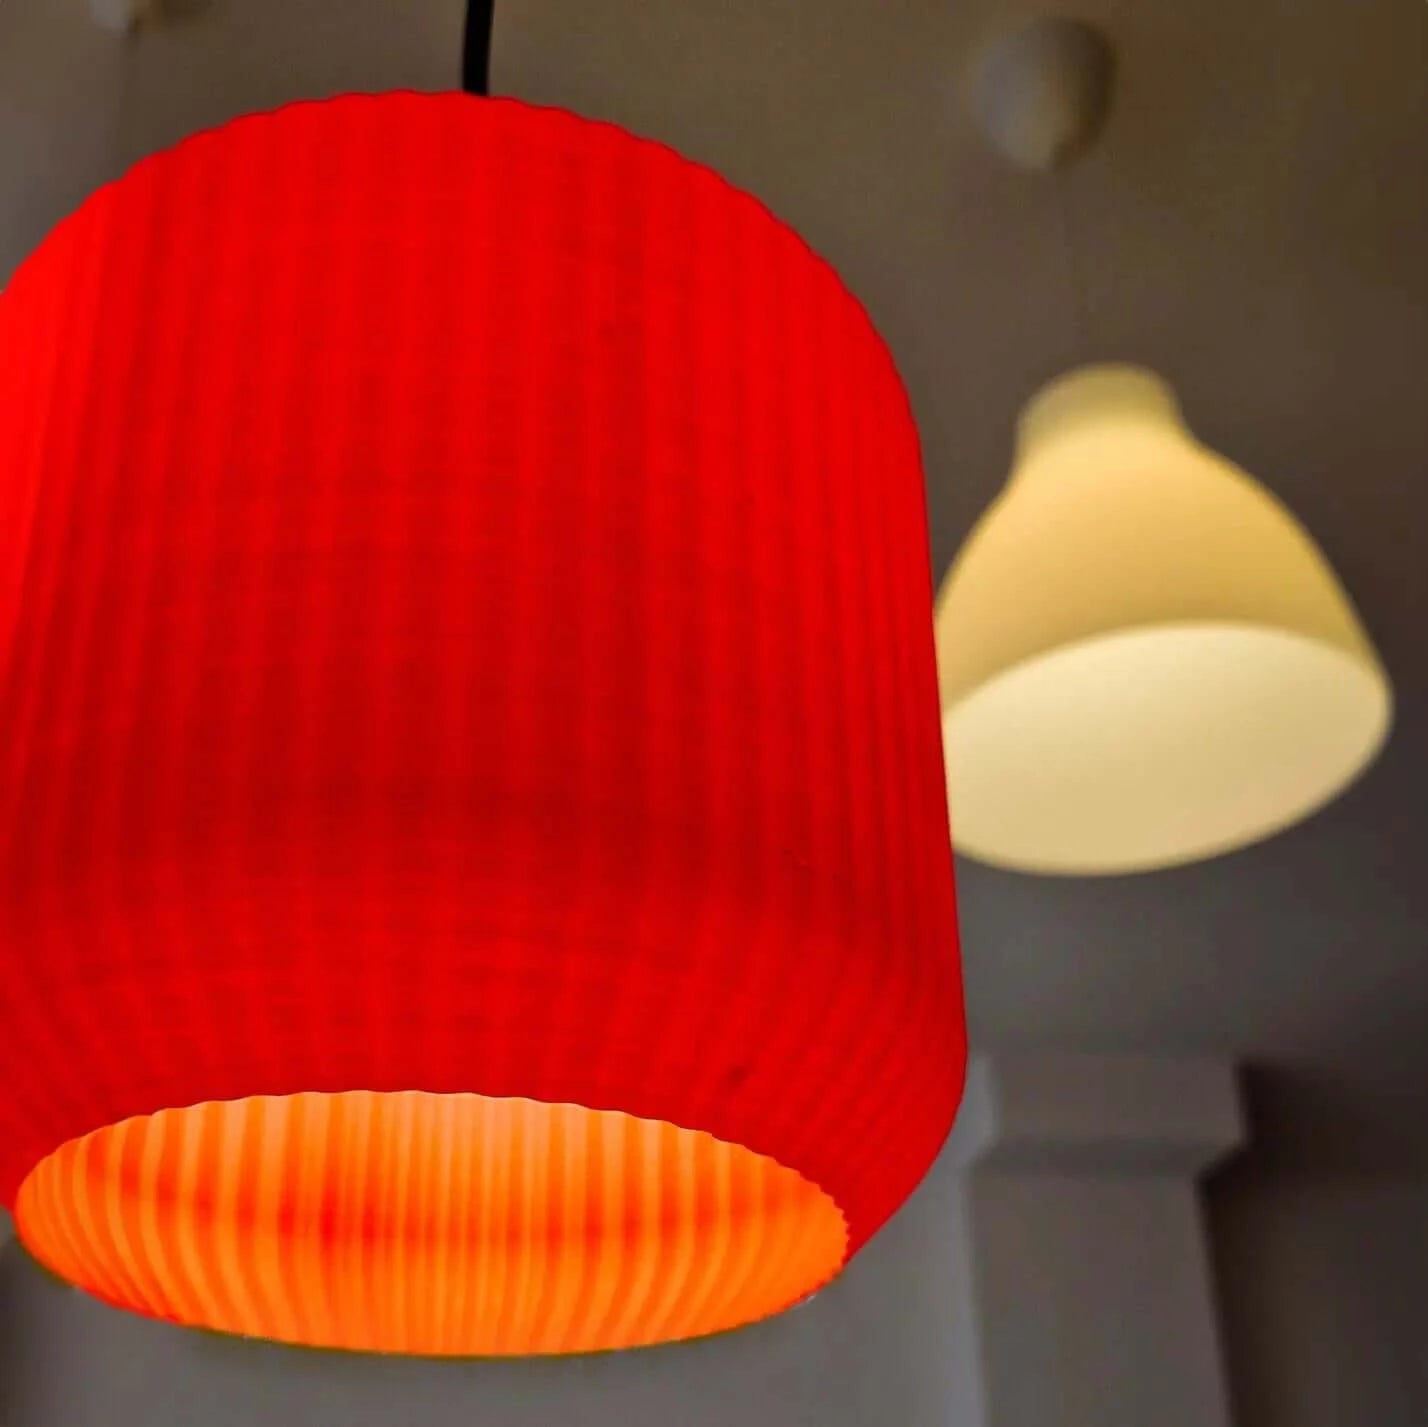 Lucash lampshade in muted red showcasing modern minimalist design and intricate 3D printed patterns.